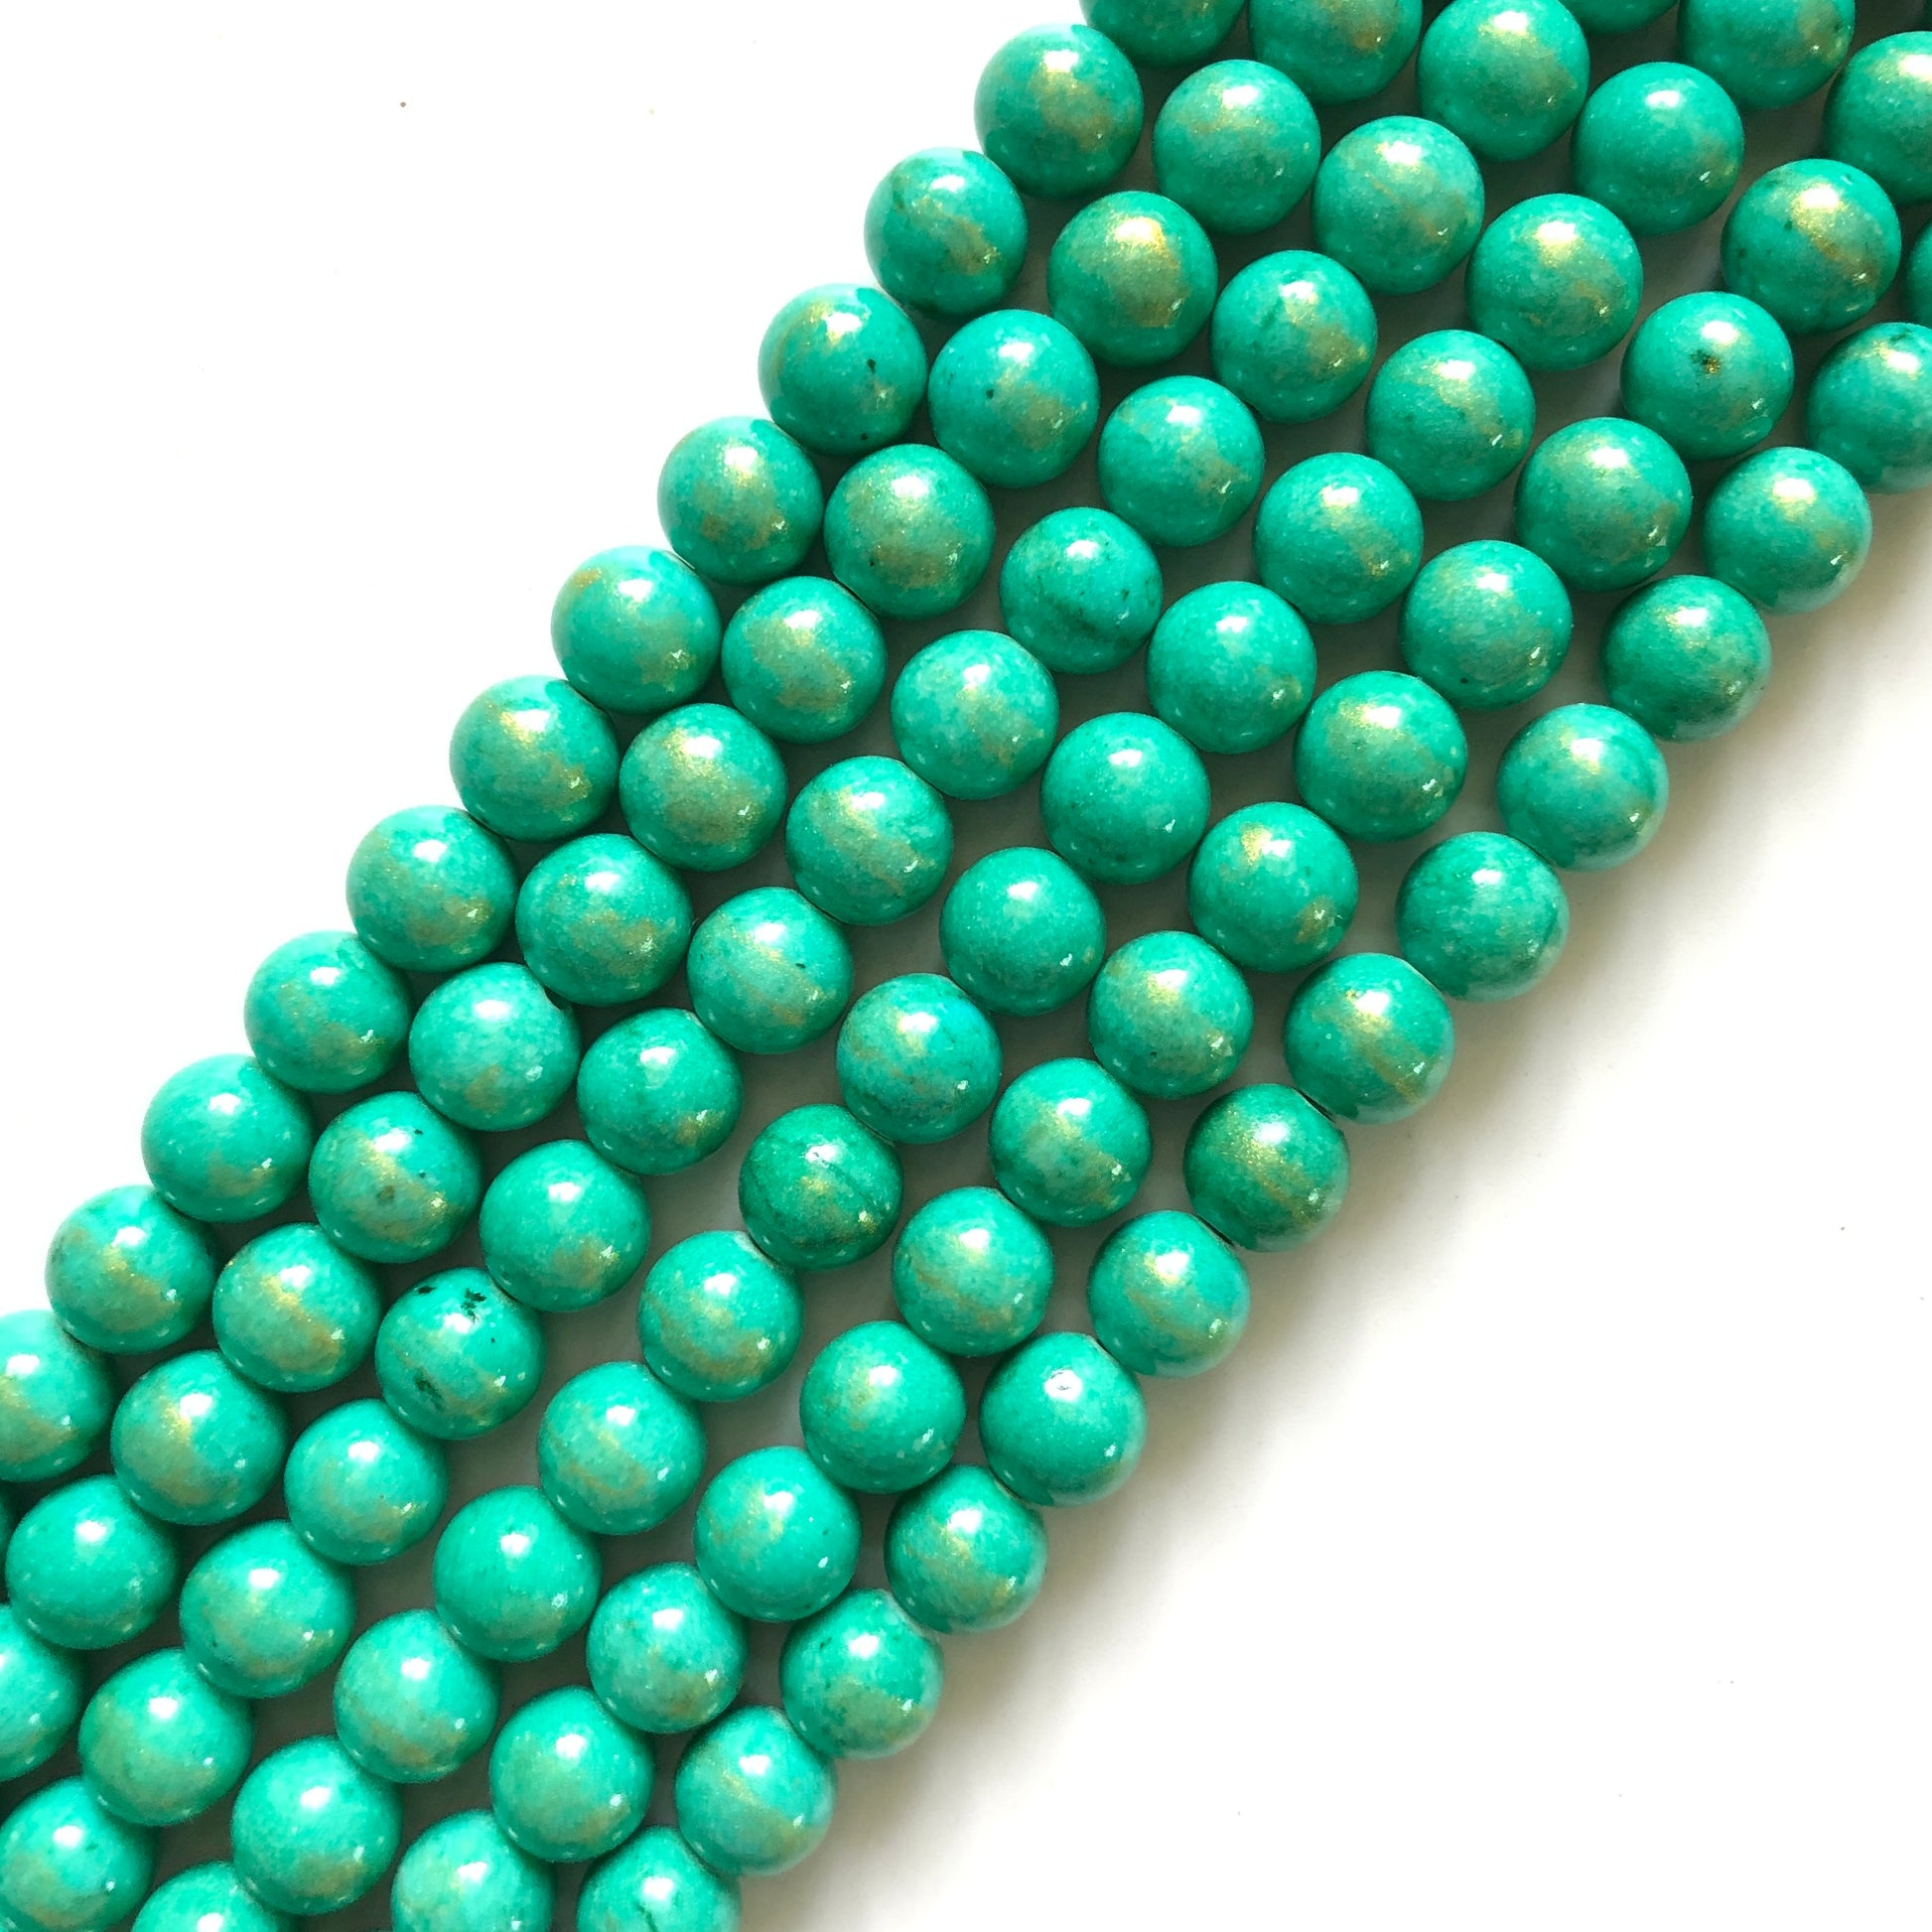 2 Strands/lot 8mm, 10mm Bright Turquoise Gold Plated Jade Round Stone Beads Stone Beads 8mm Stone Beads Gold Plated Jade Beads Round Jade Beads Charms Beads Beyond